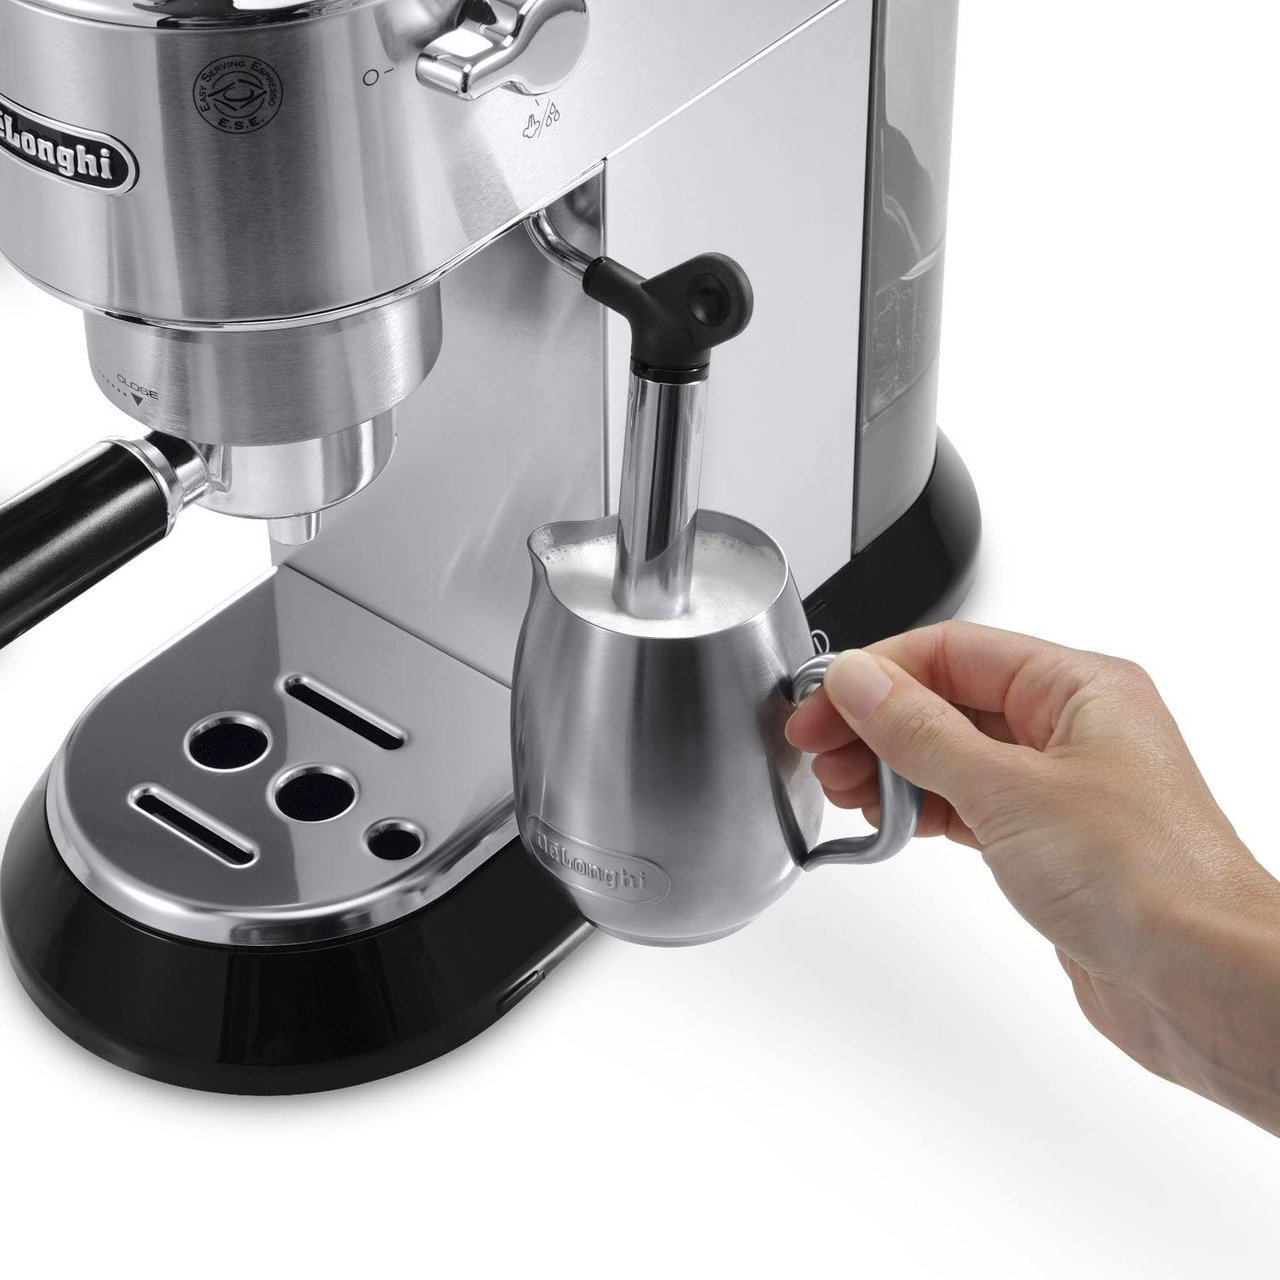 4 The De'Longhi EC680 Slim Stainless Steel Espresso and Cappuccino Machine with 15 Bar Pressure and Advanced Cappuccino System.